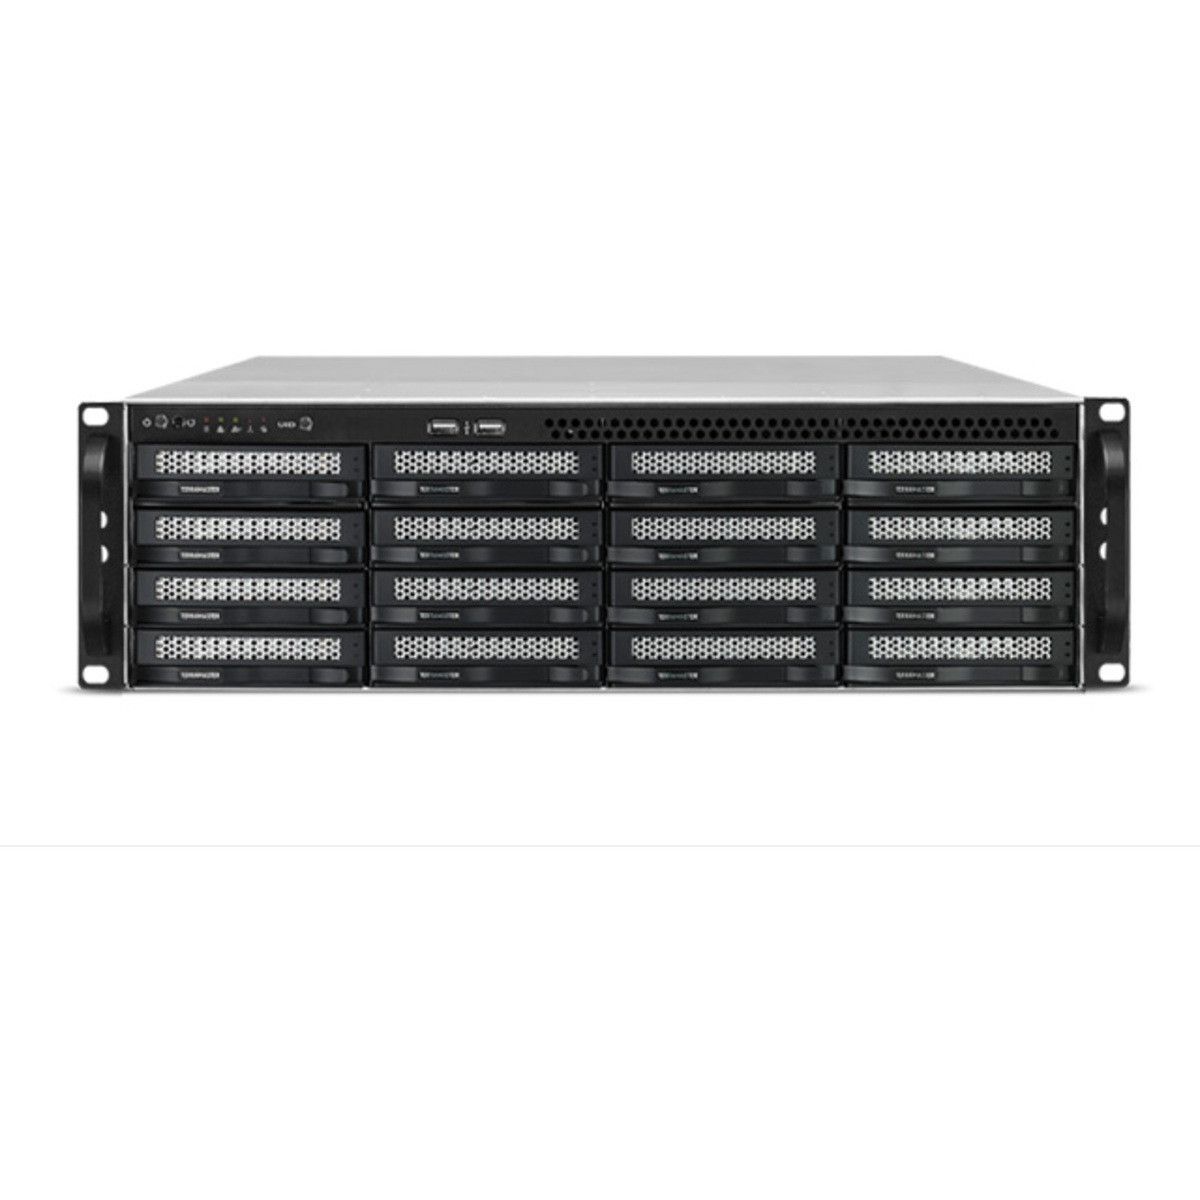 TerraMaster U16-722-2224 308tb 16-Bay RackMount Large Business / Enterprise NAS - Network Attached Storage Device 14x22tb Seagate IronWolf Pro ST22000NT001 3.5 7200rpm SATA 6Gb/s HDD NAS Class Drives Installed - Burn-In Tested U16-722-2224